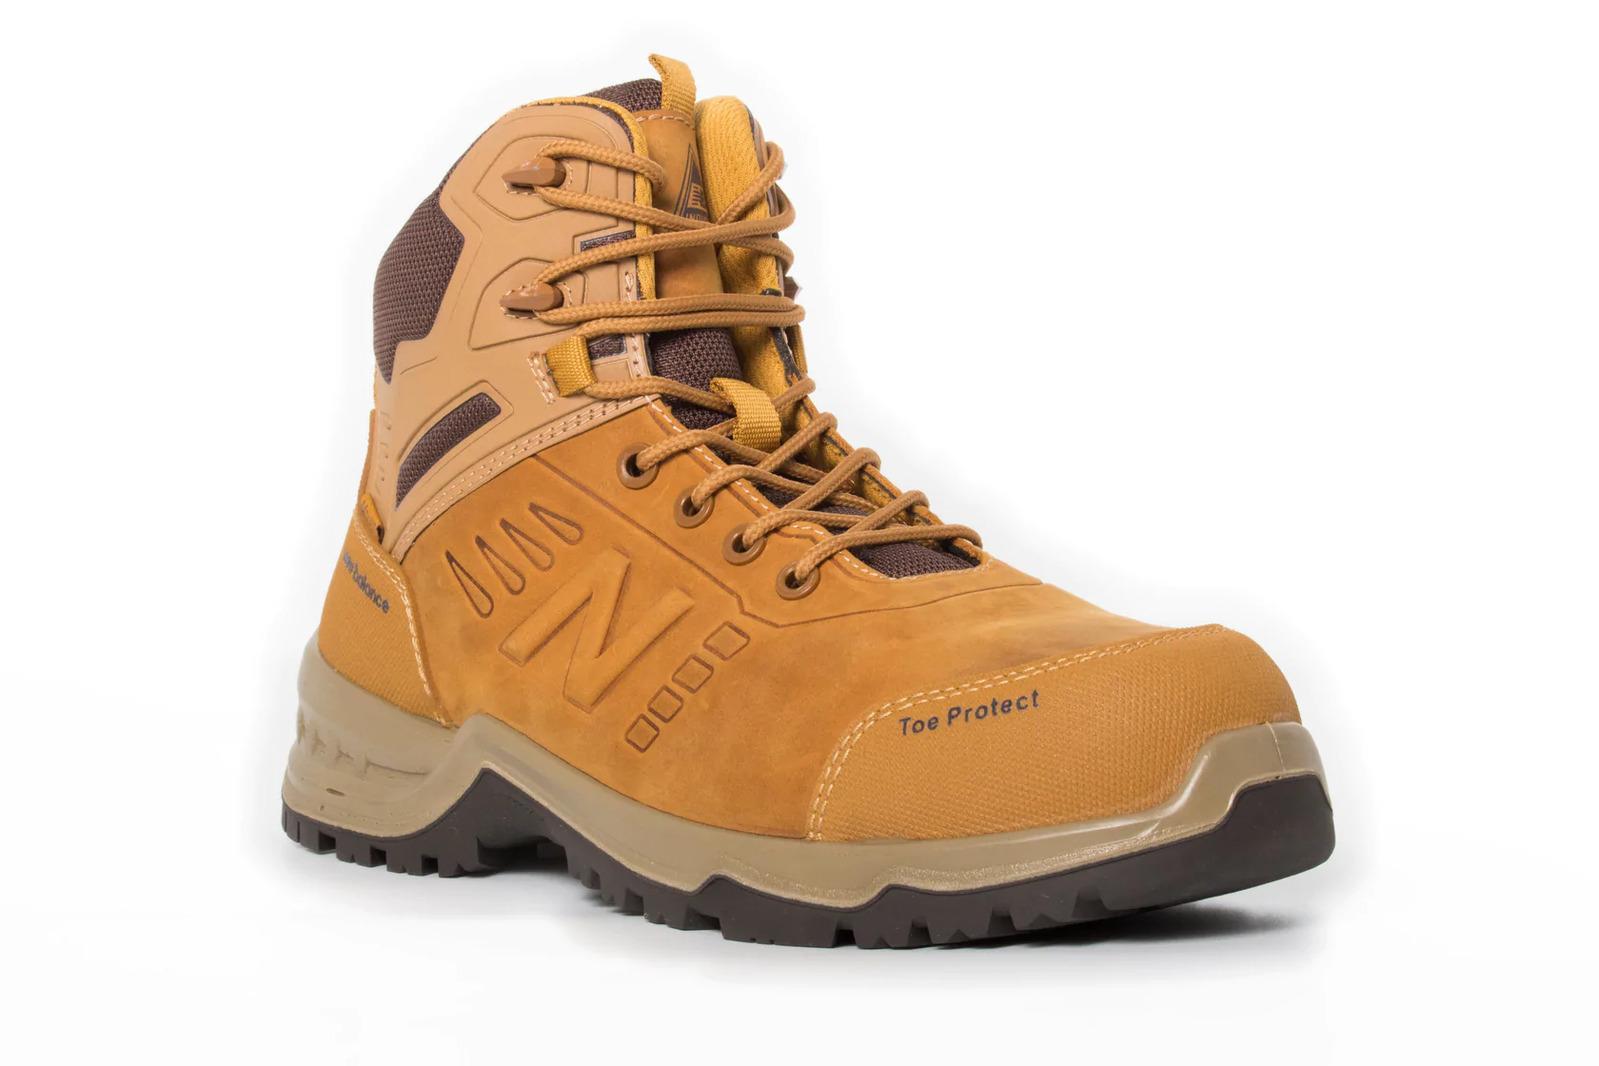 New Balance Mens Contour Steel Toe Cap Safety Work Boots with Zip - Wheat - US 12 Width:2E